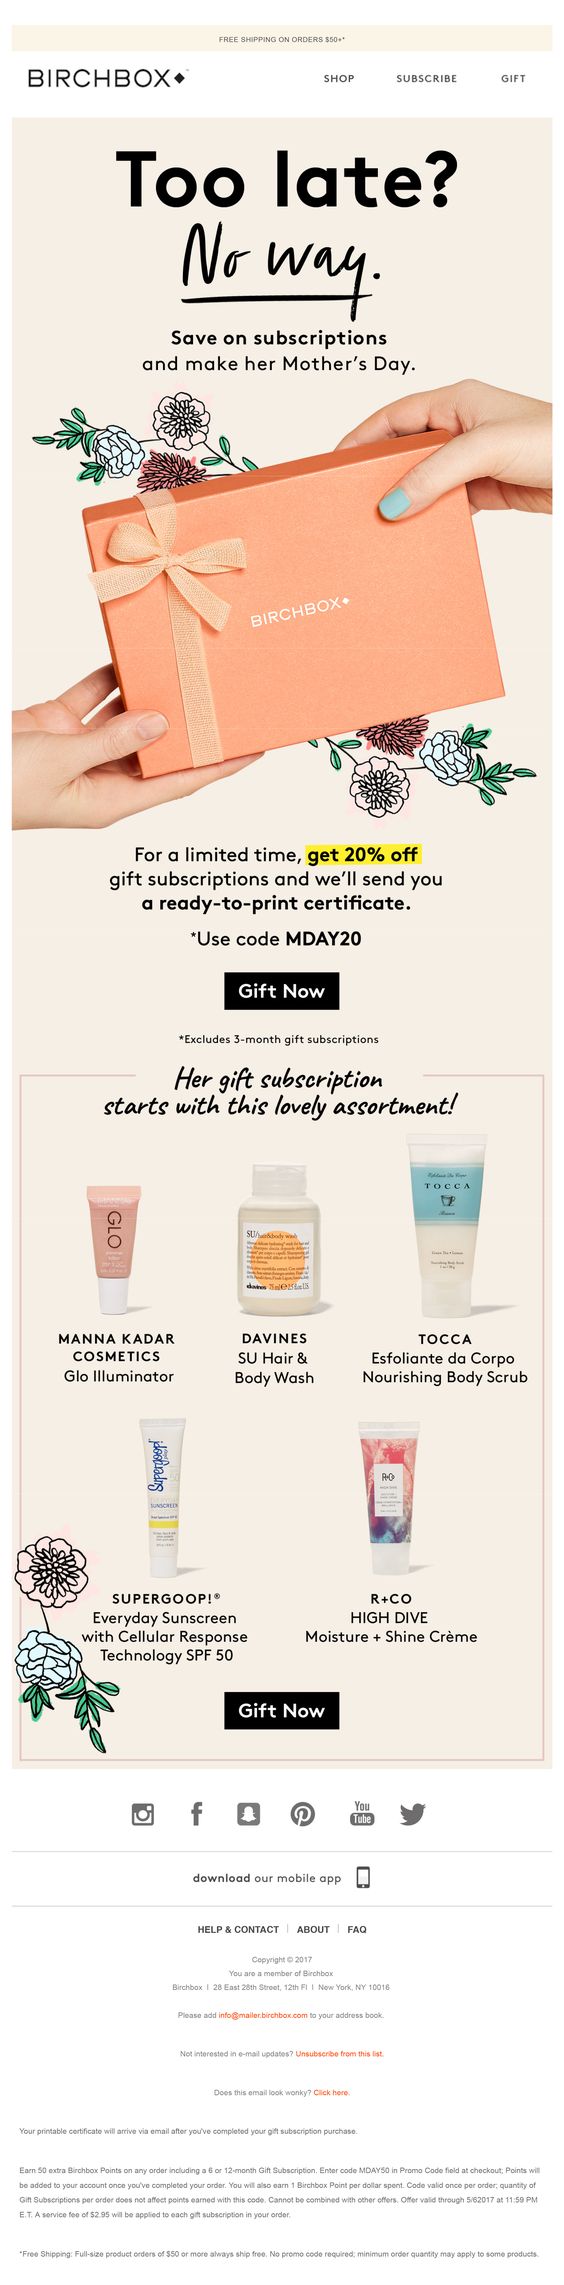 Email from Birchbox